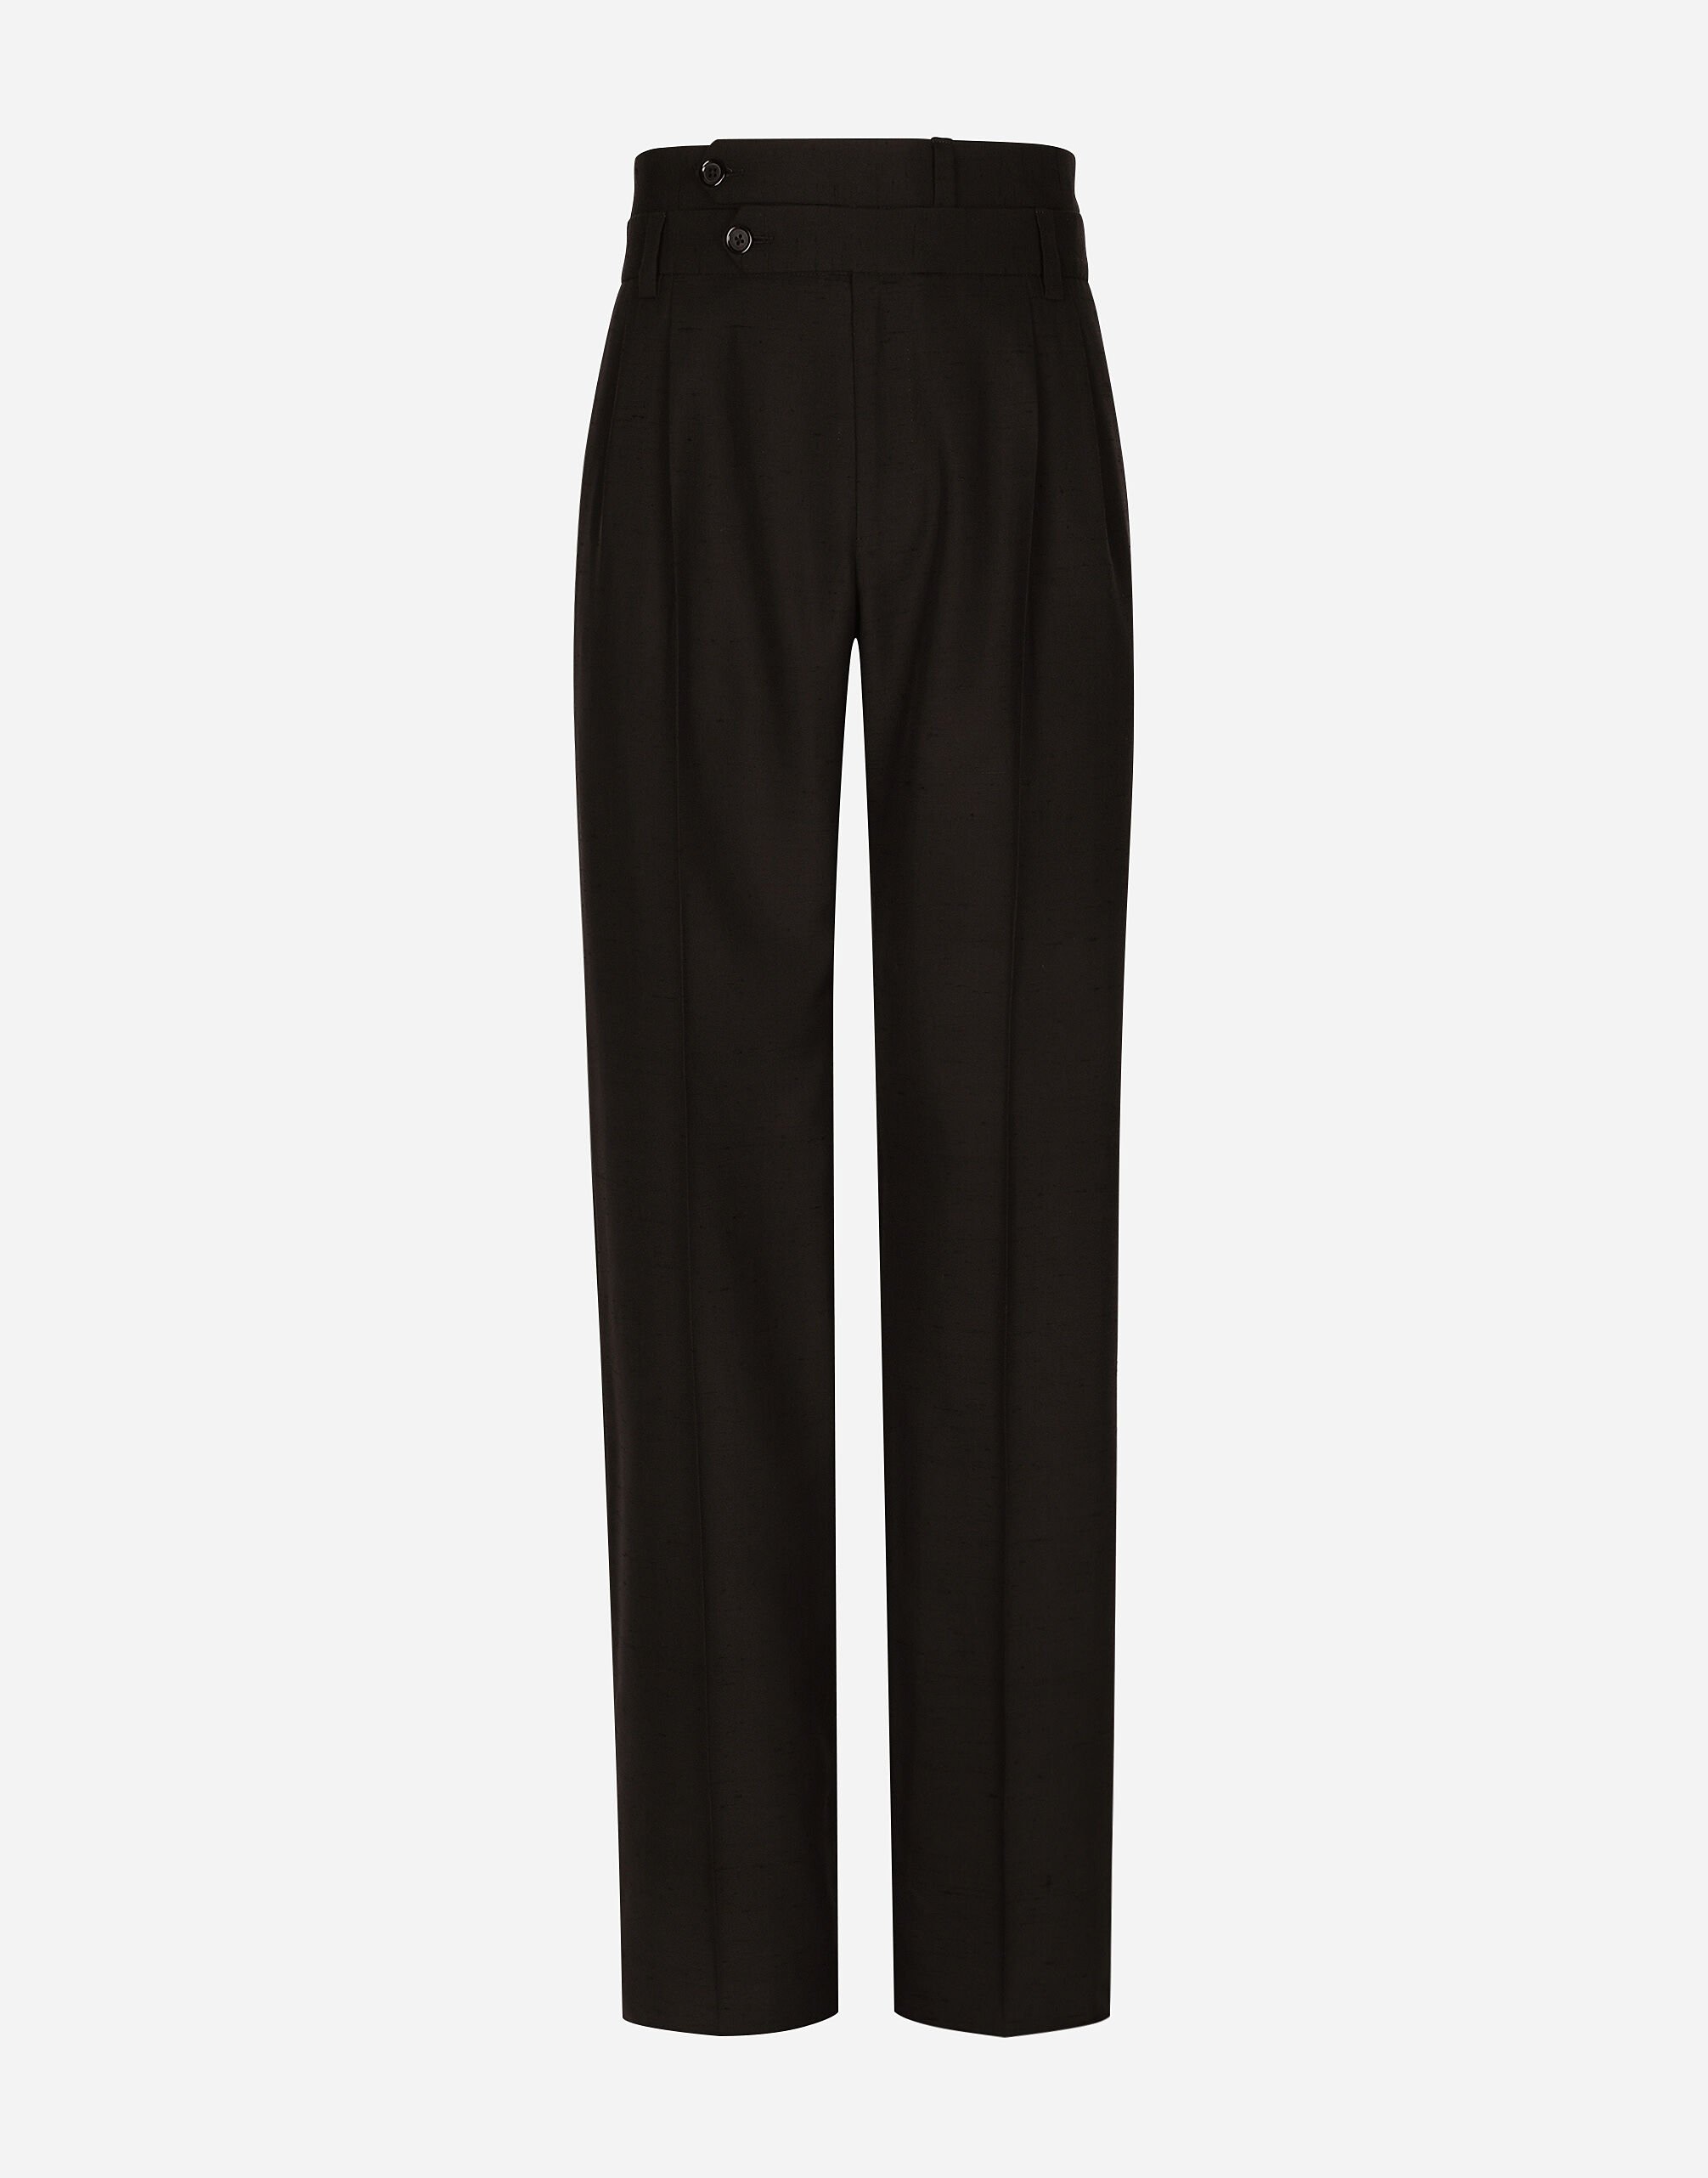 Tailored shantung silk and cotton pants in Black for 